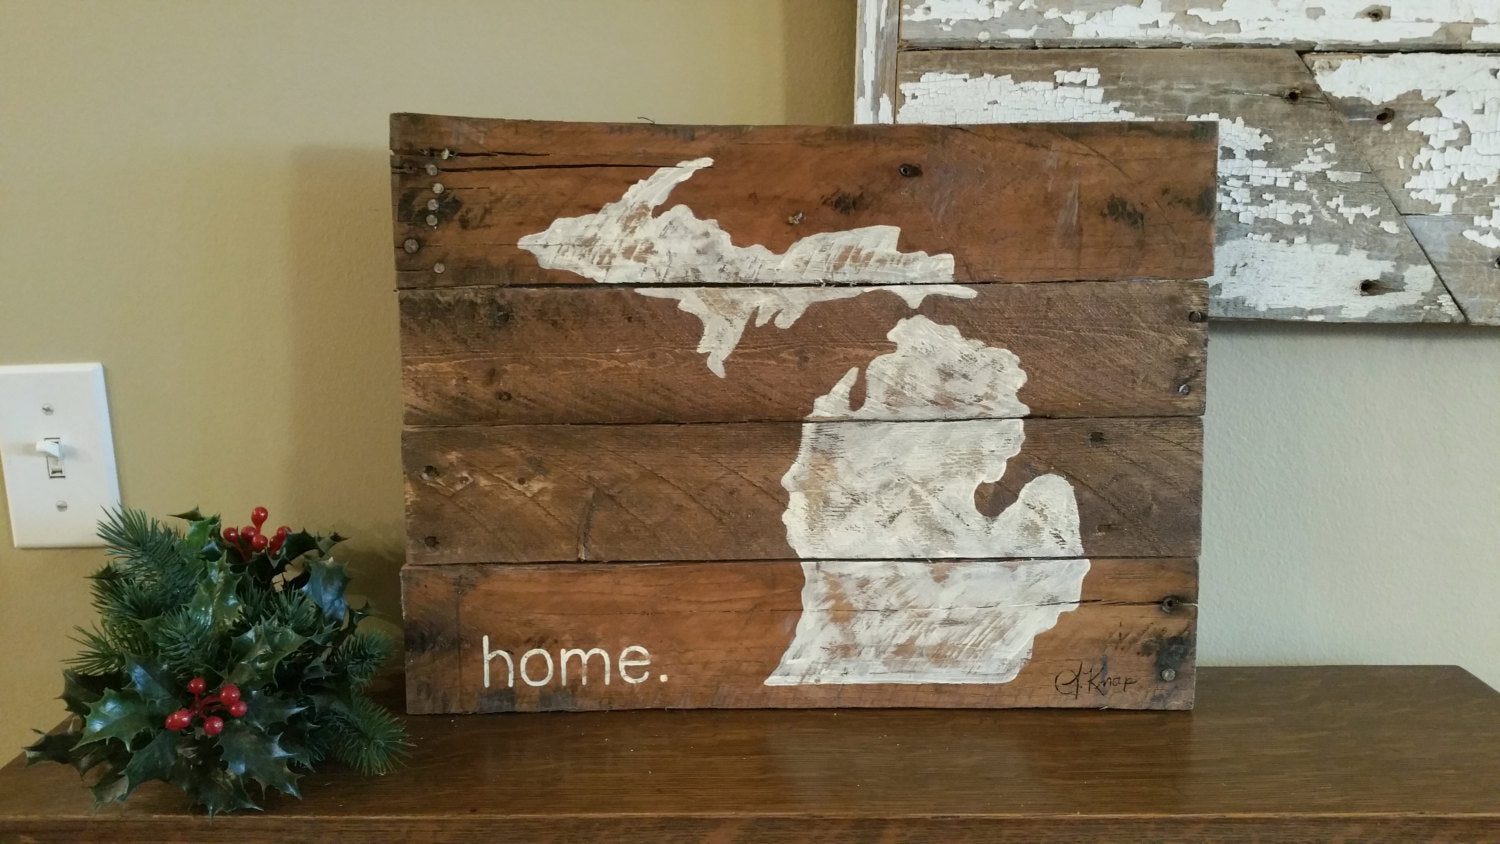 State of Michigan home word sign, Hand painted Pallet Art